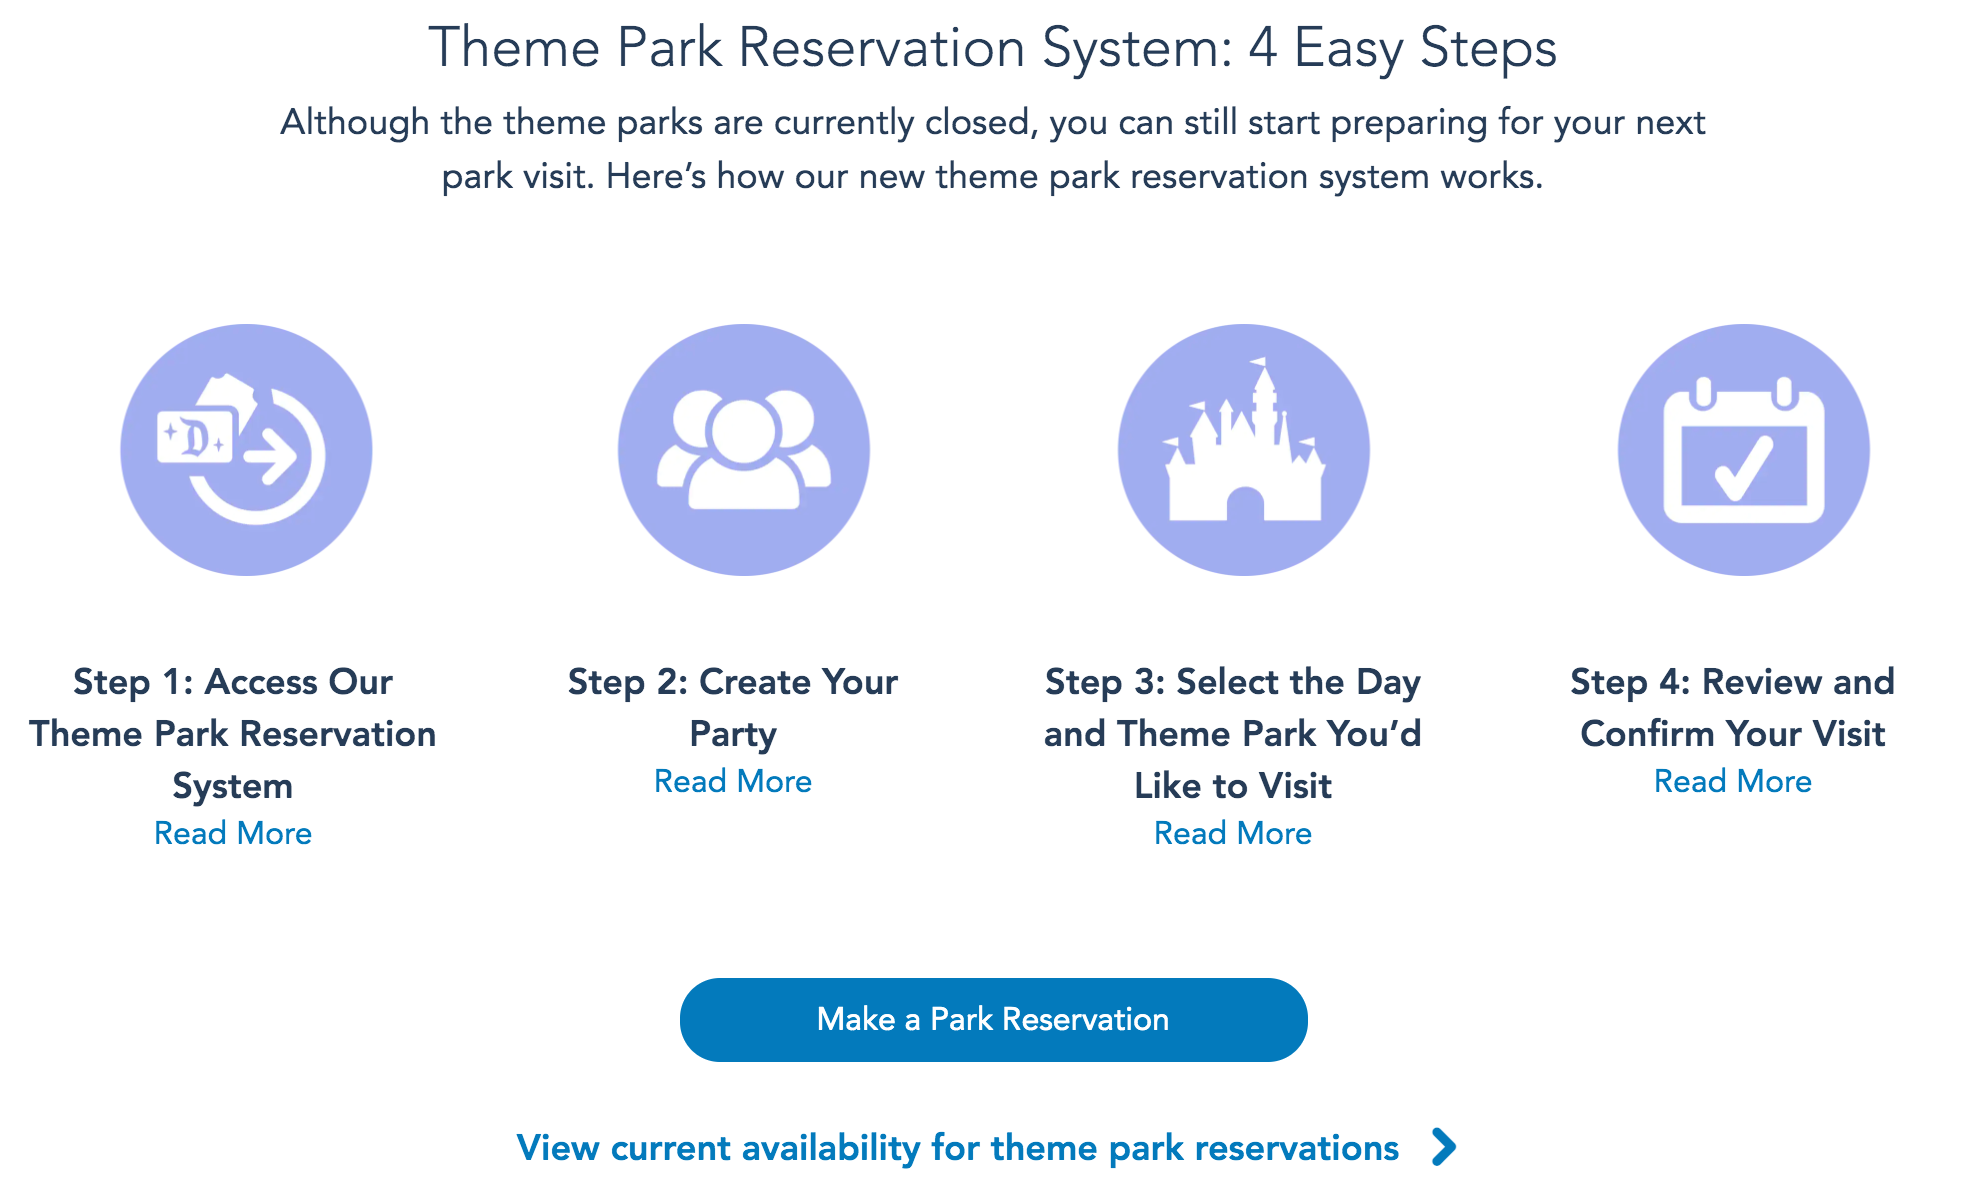 How to Make Disney Park Reservations